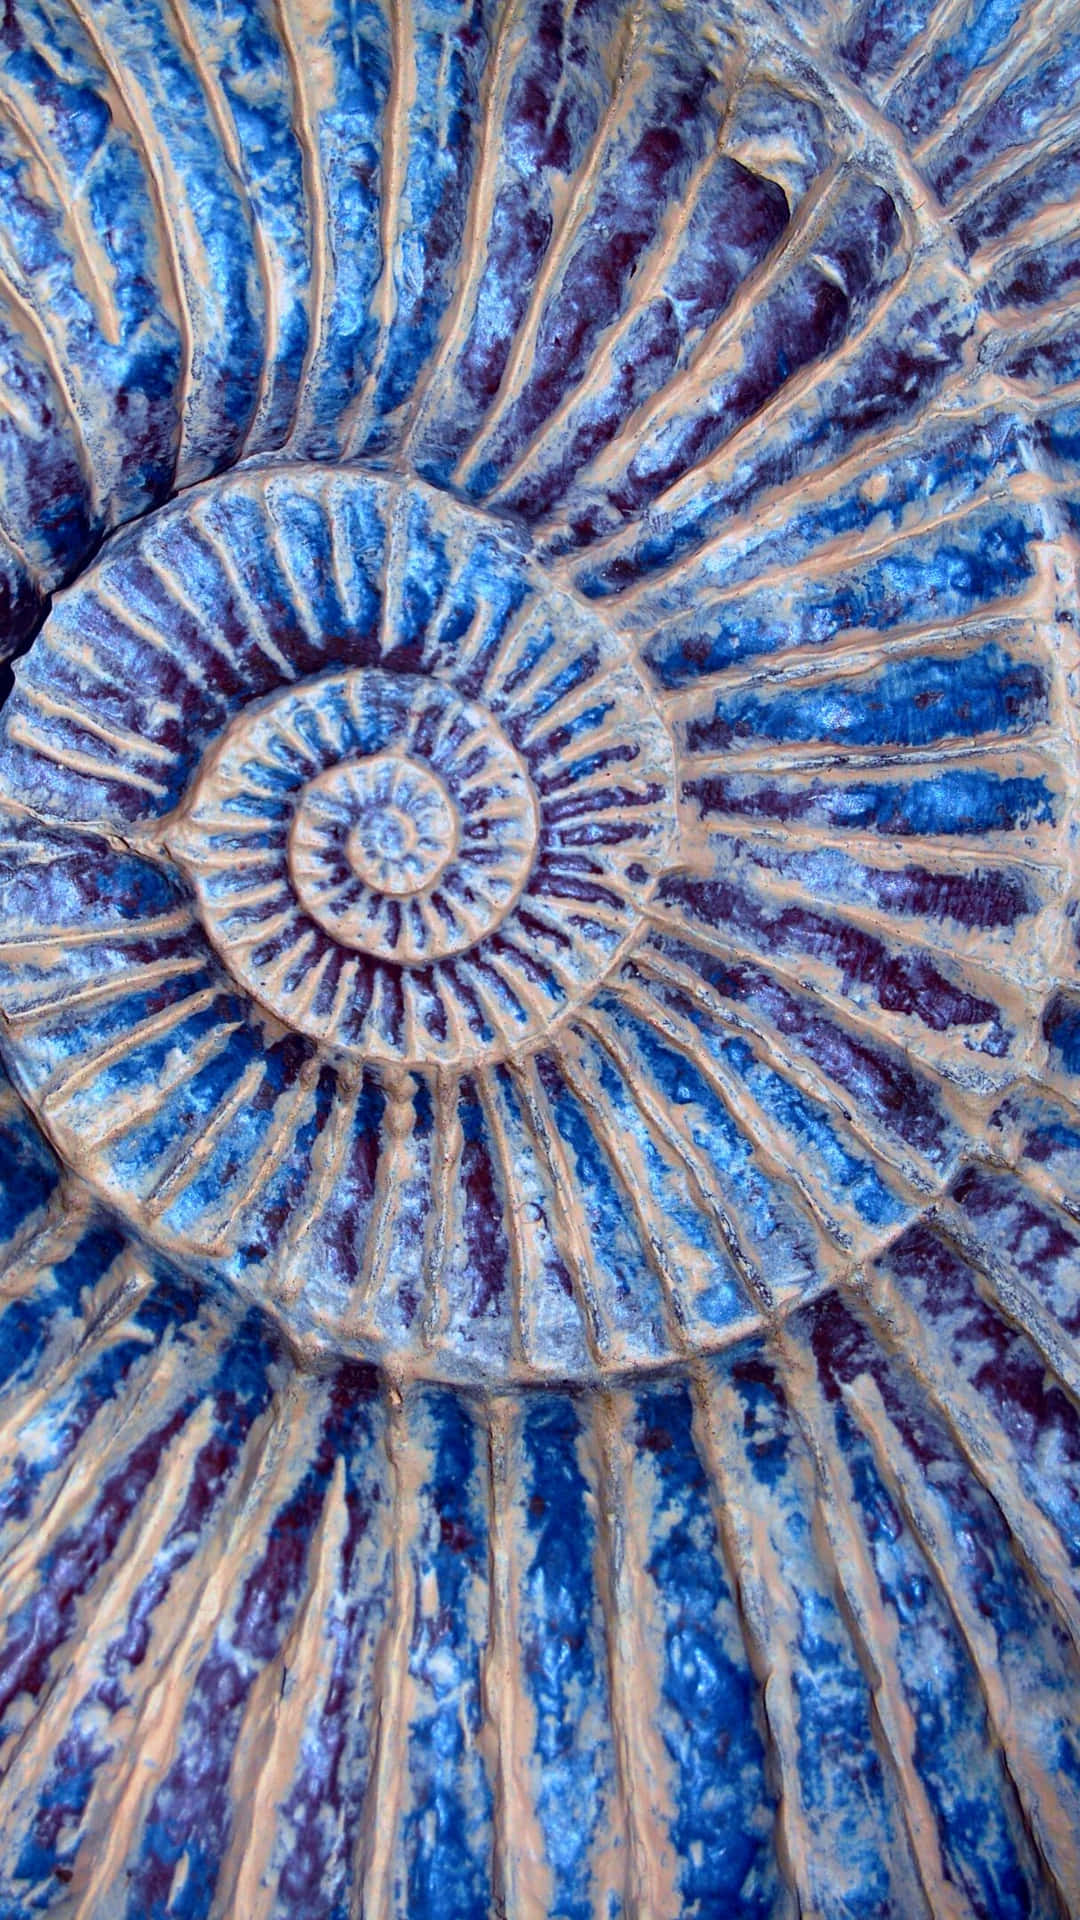 A Blue And White Shell With A Spiral Pattern